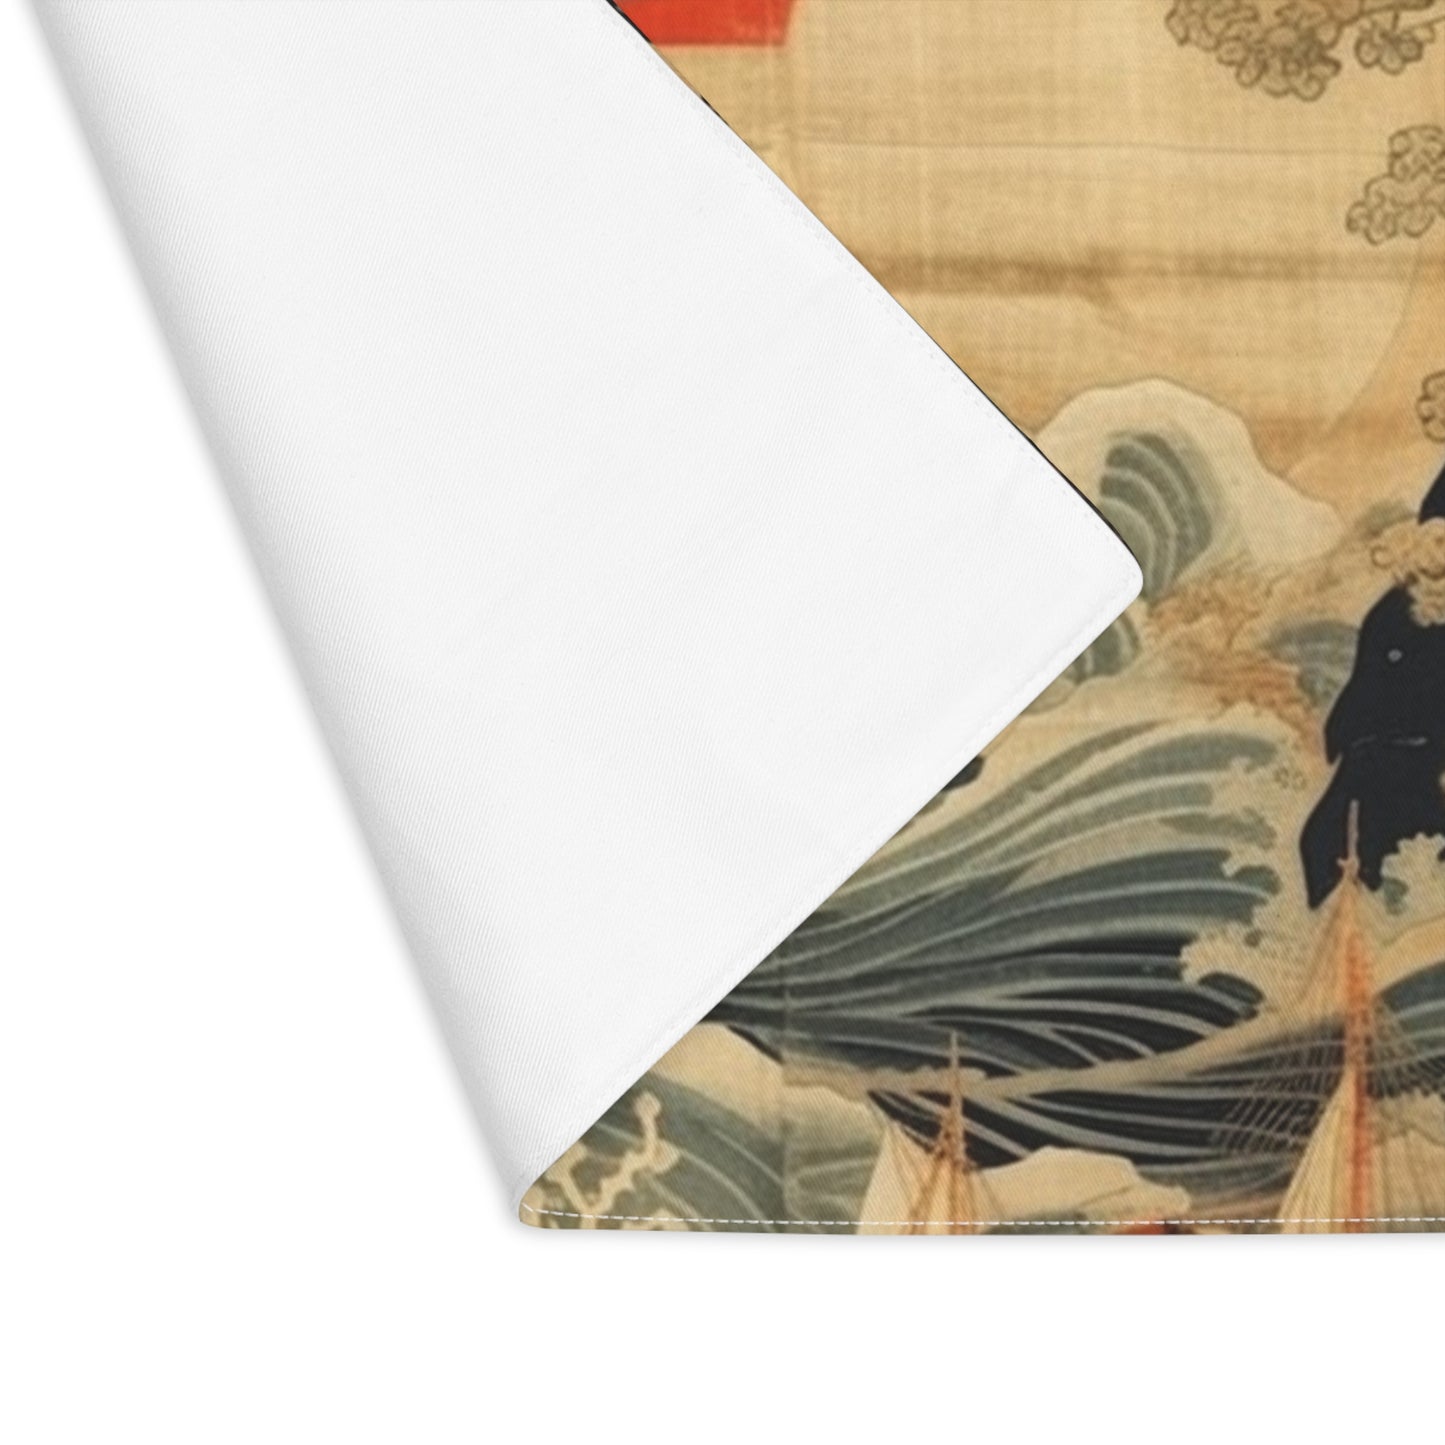 Artistic Fusion: Placemat Where Japanese Tapestry Meets the Perfect Placemat